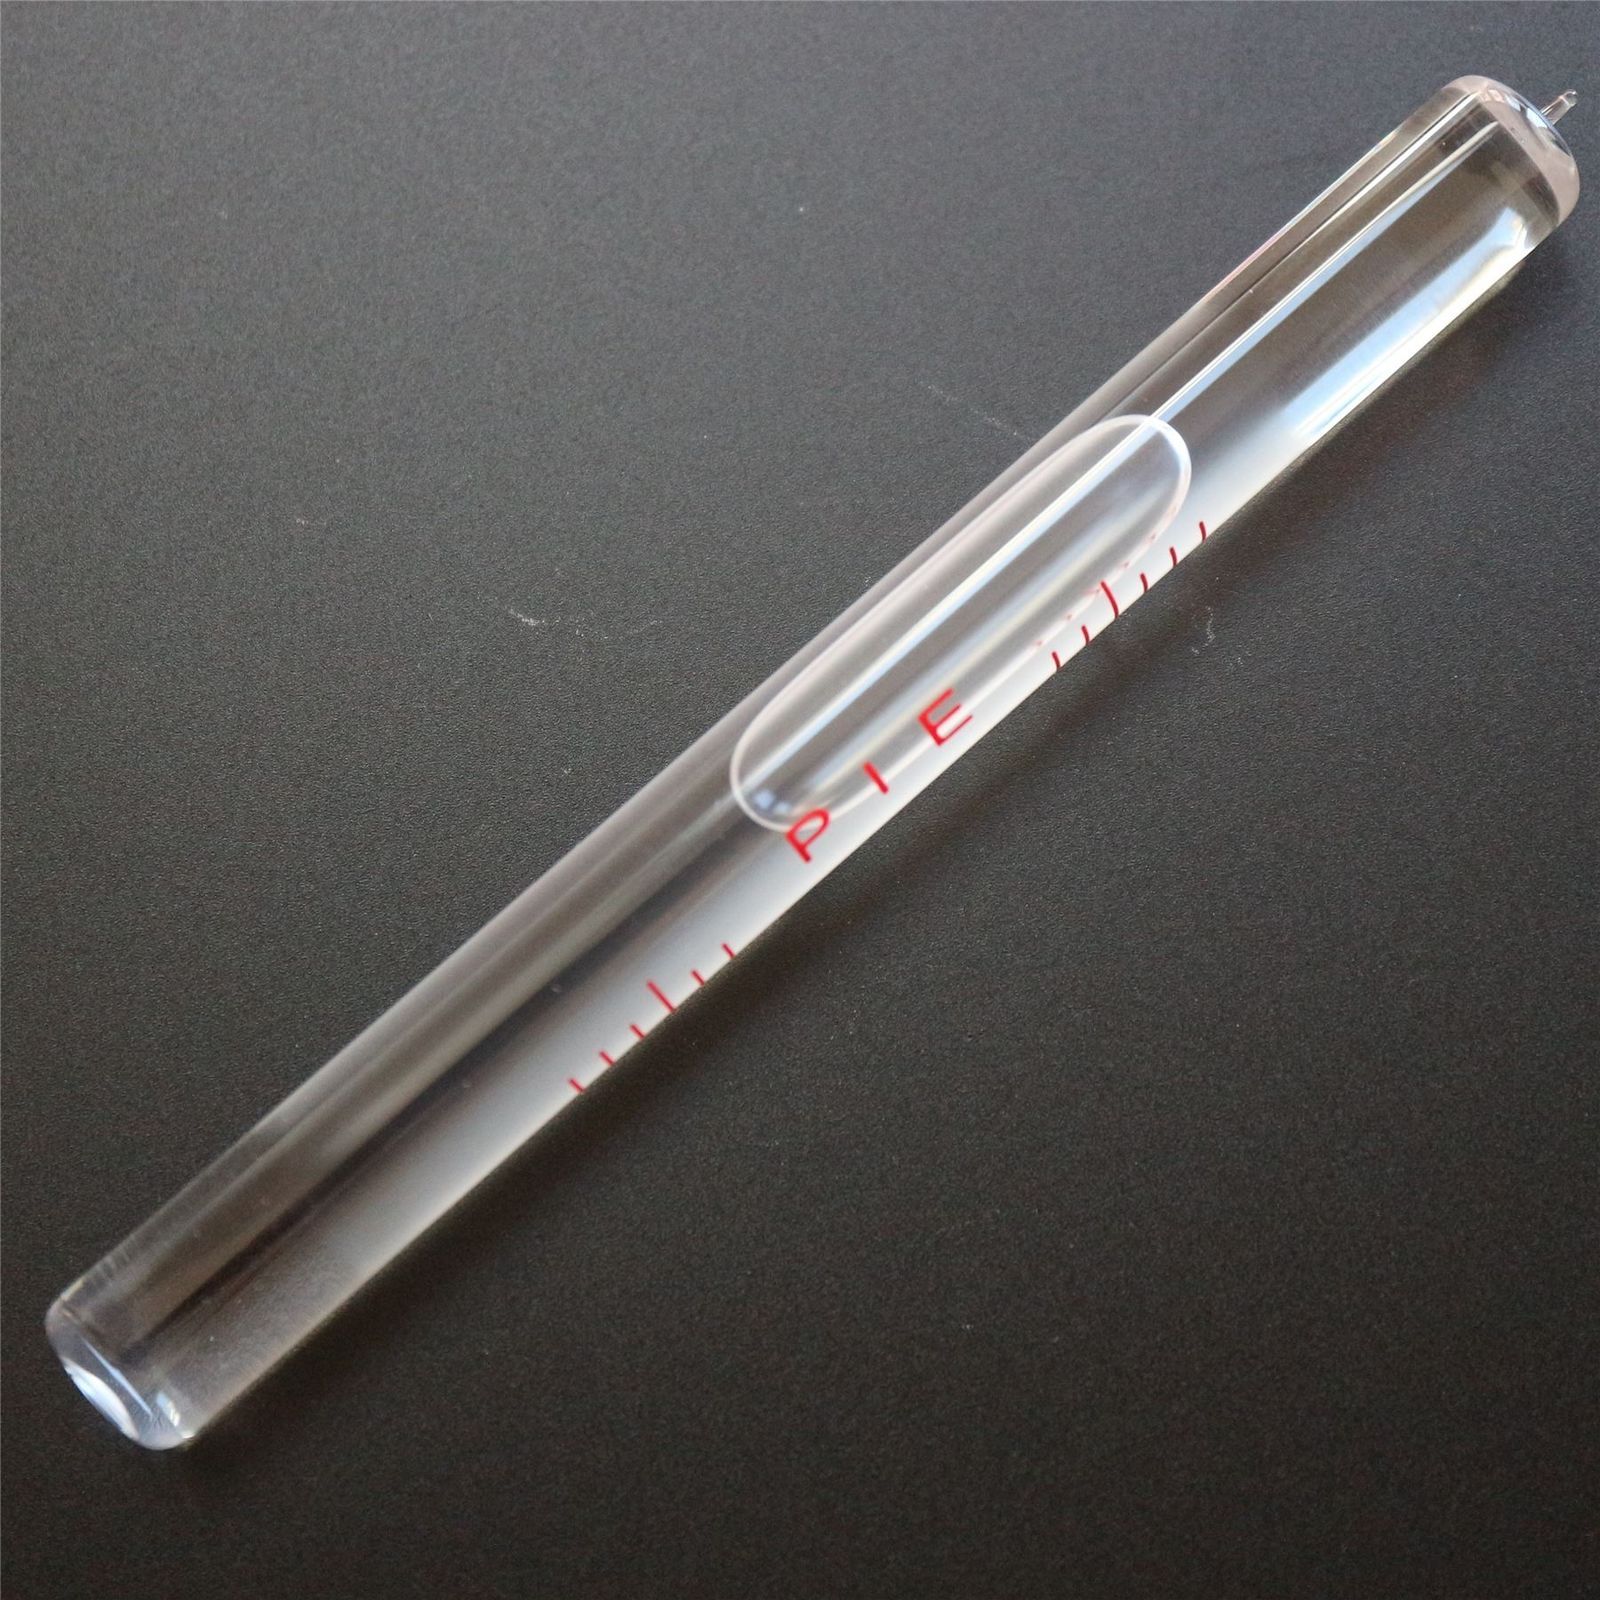 Primary image for Replacement Glass Vial, Spirit Bubble Level, nib, Accurate, 100mm x 9.5mm, Clear